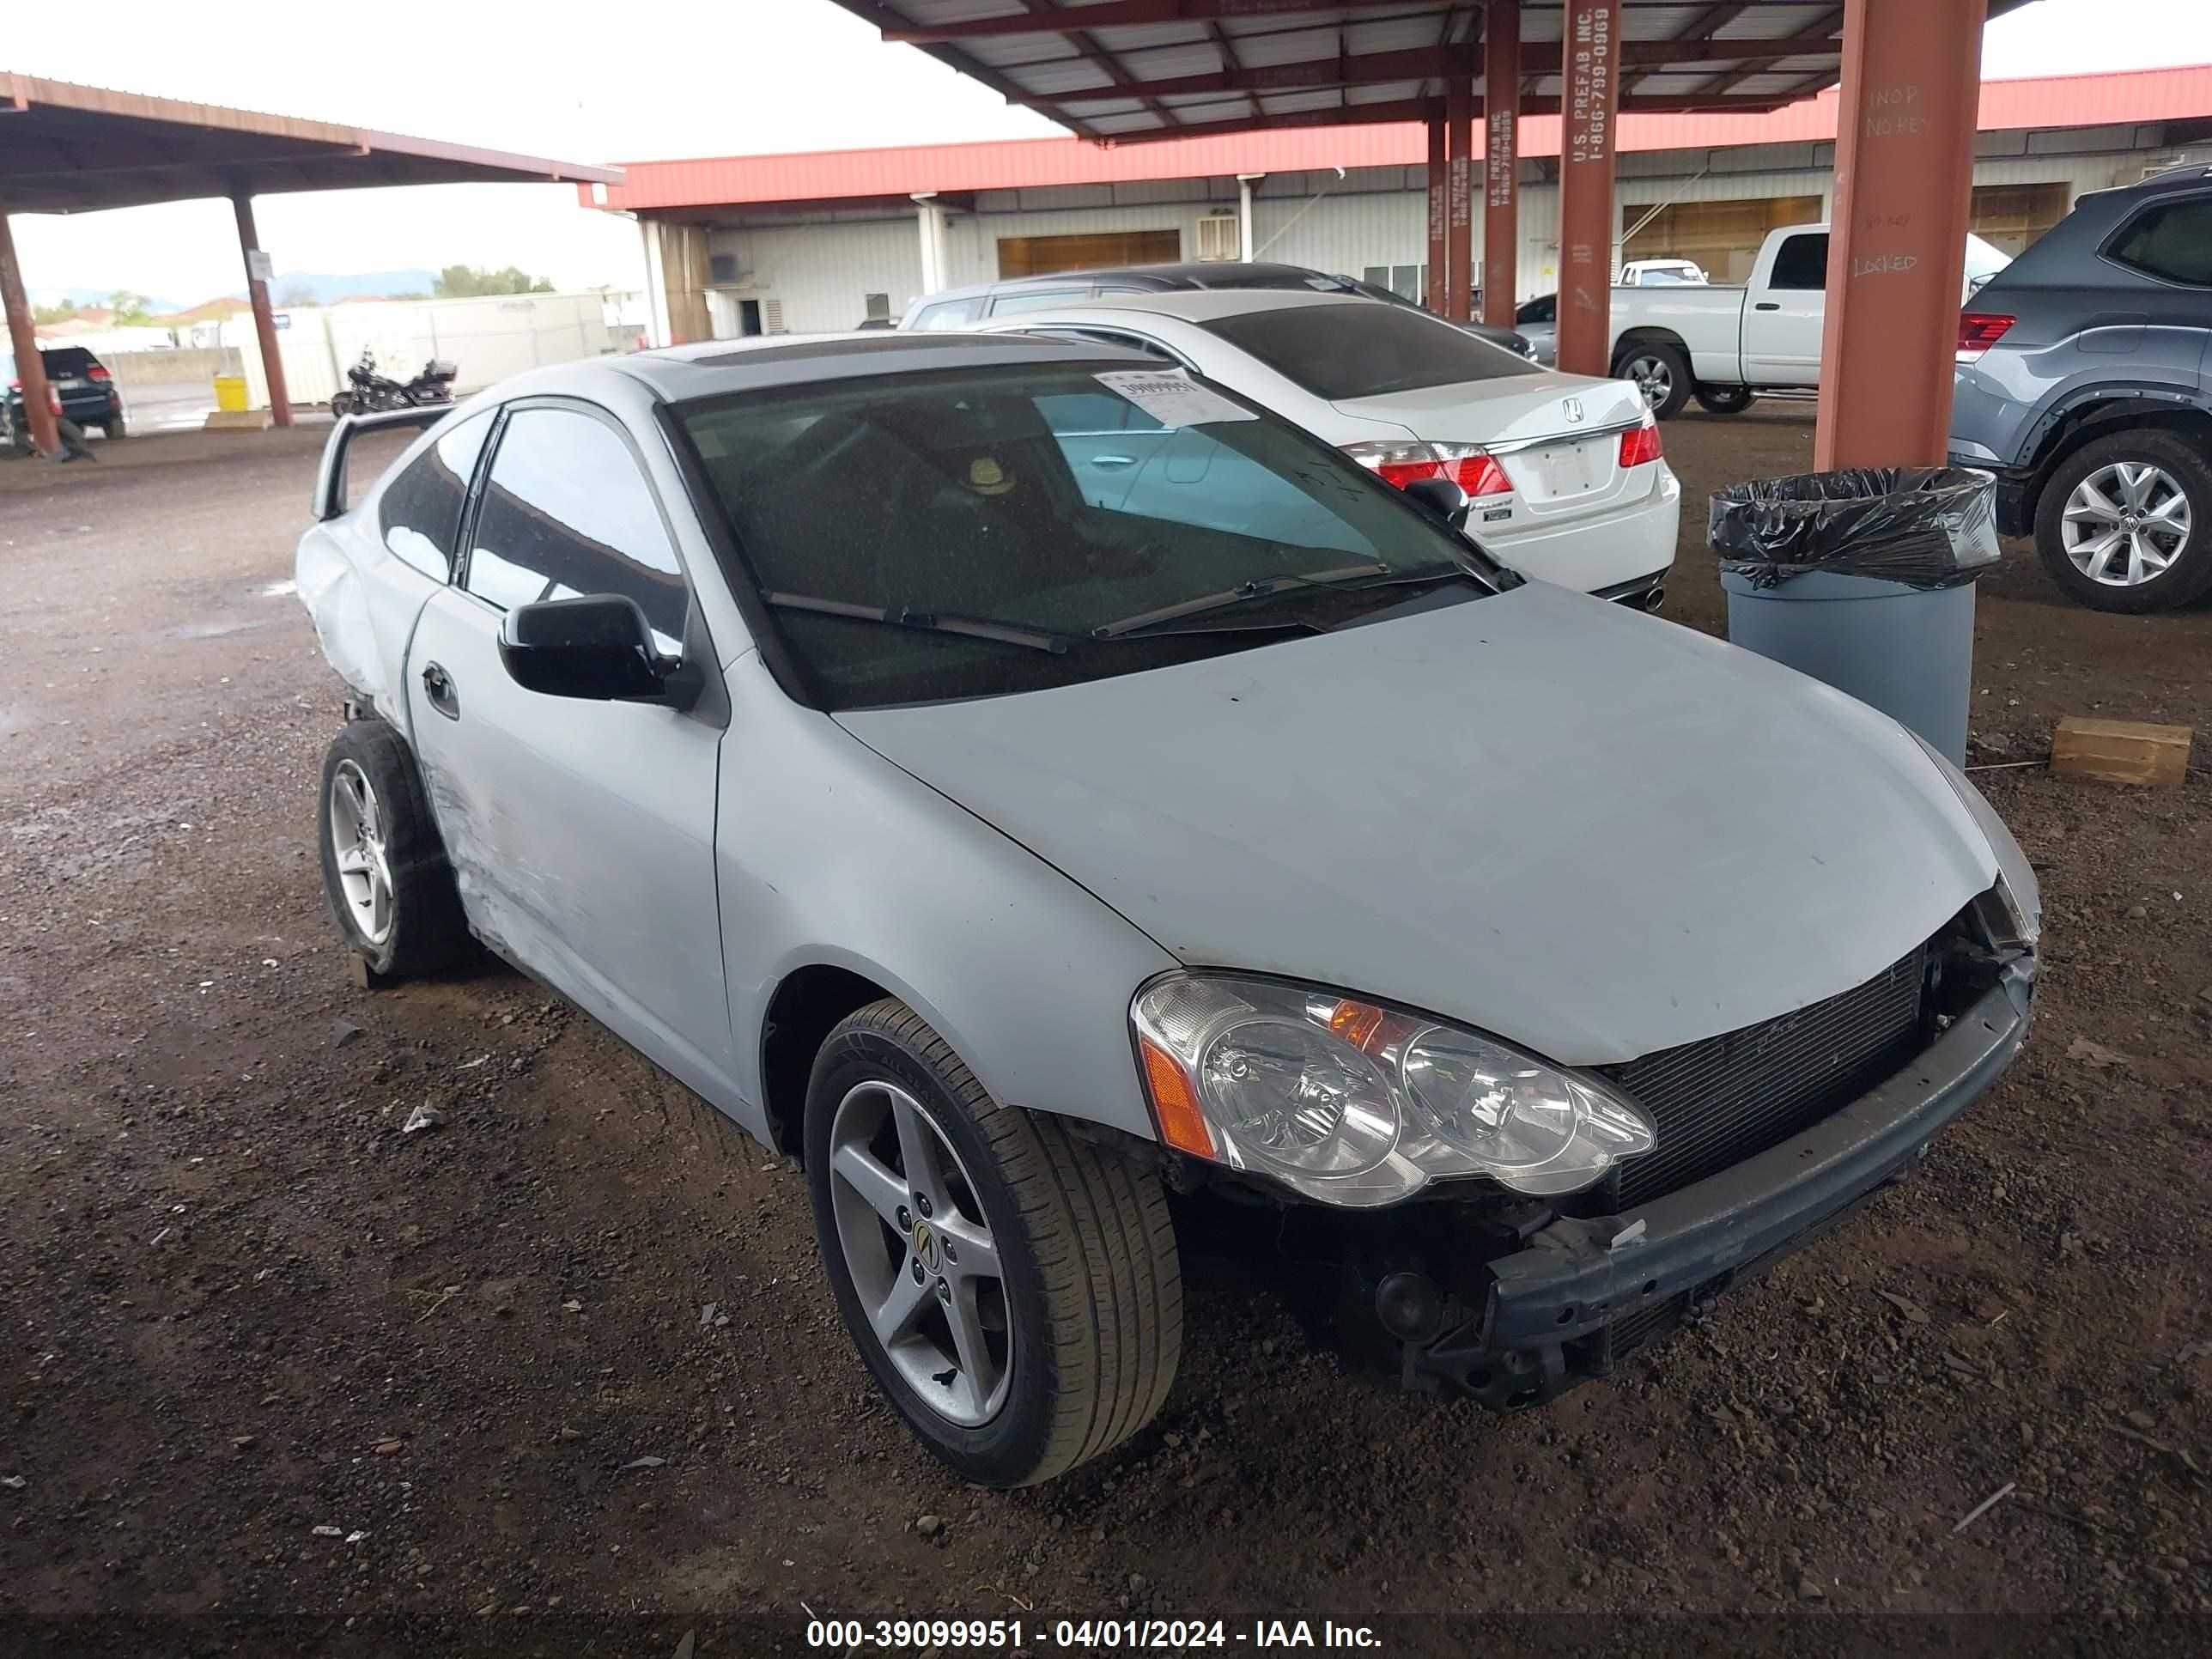 VIN: JH4DC54864S018517 - acura rsx